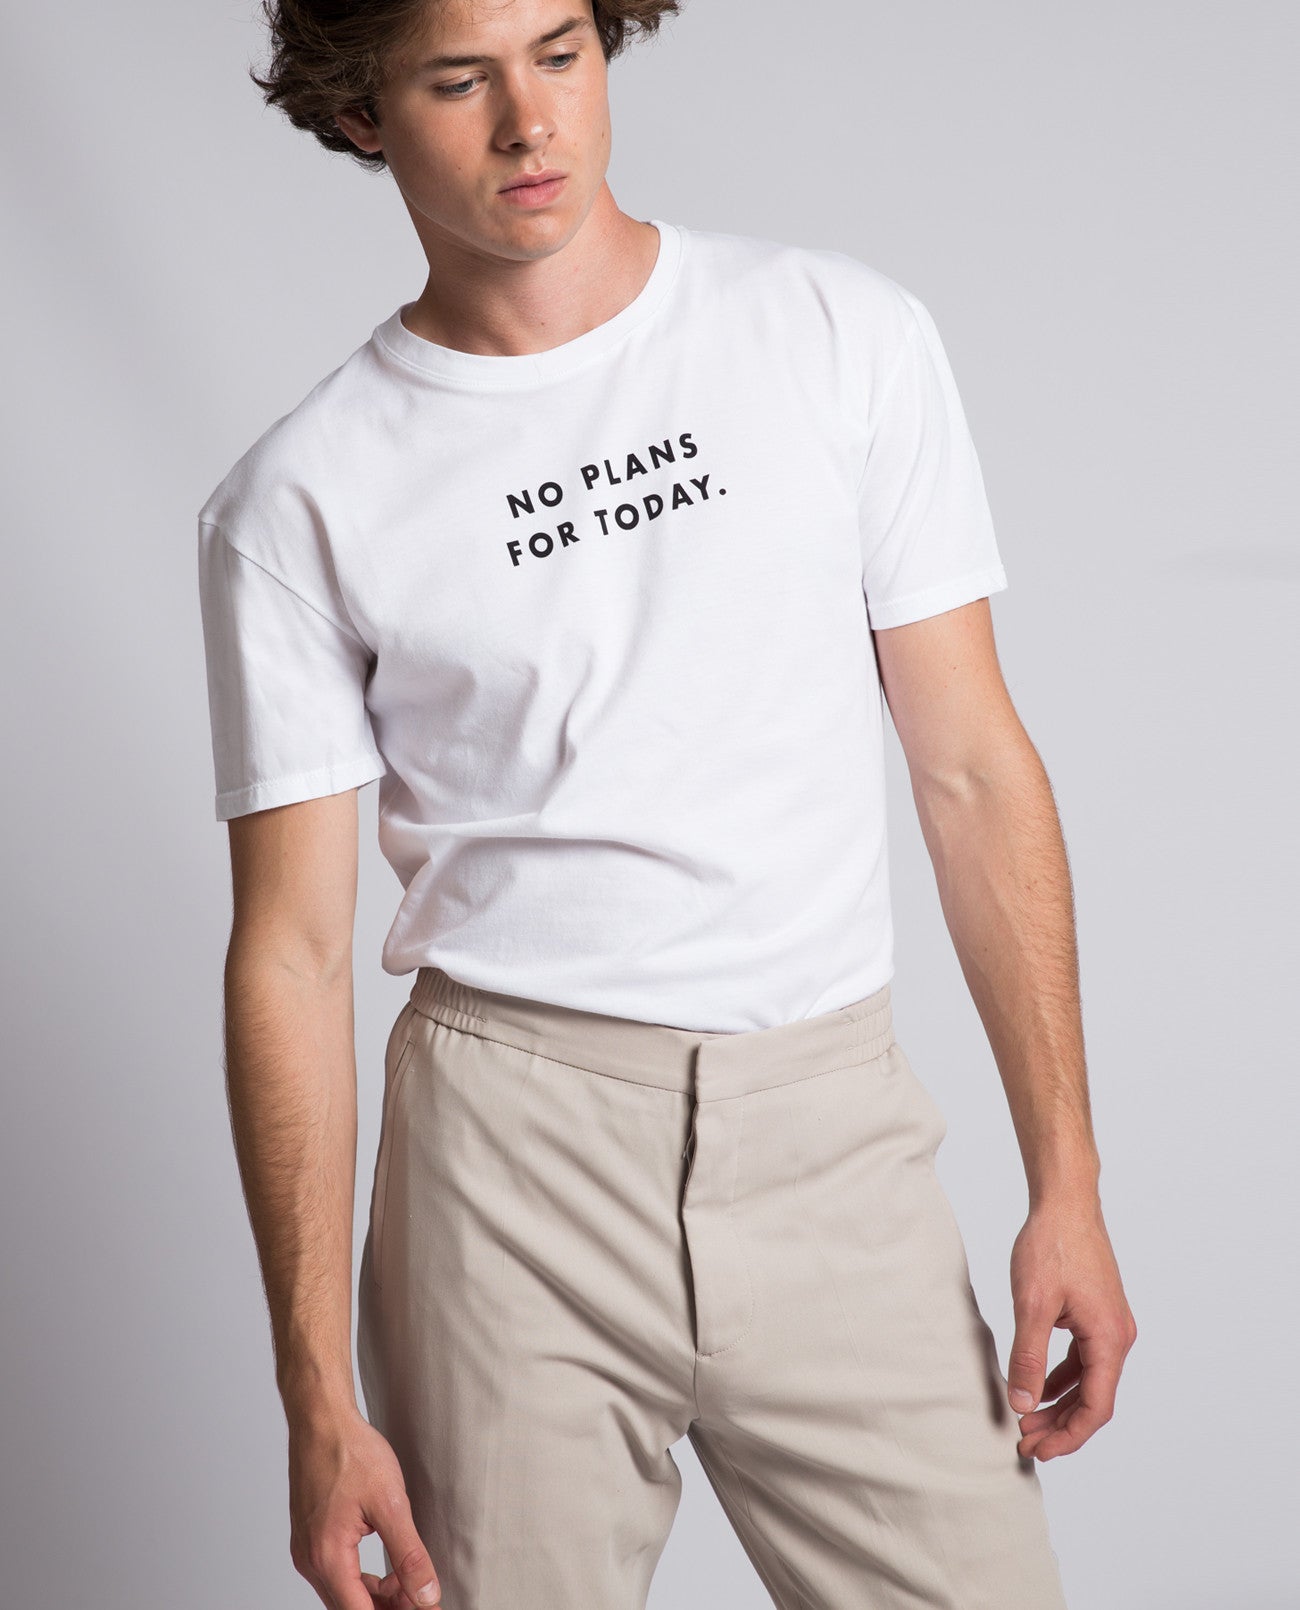 No plans for today Tee - Local Pattern